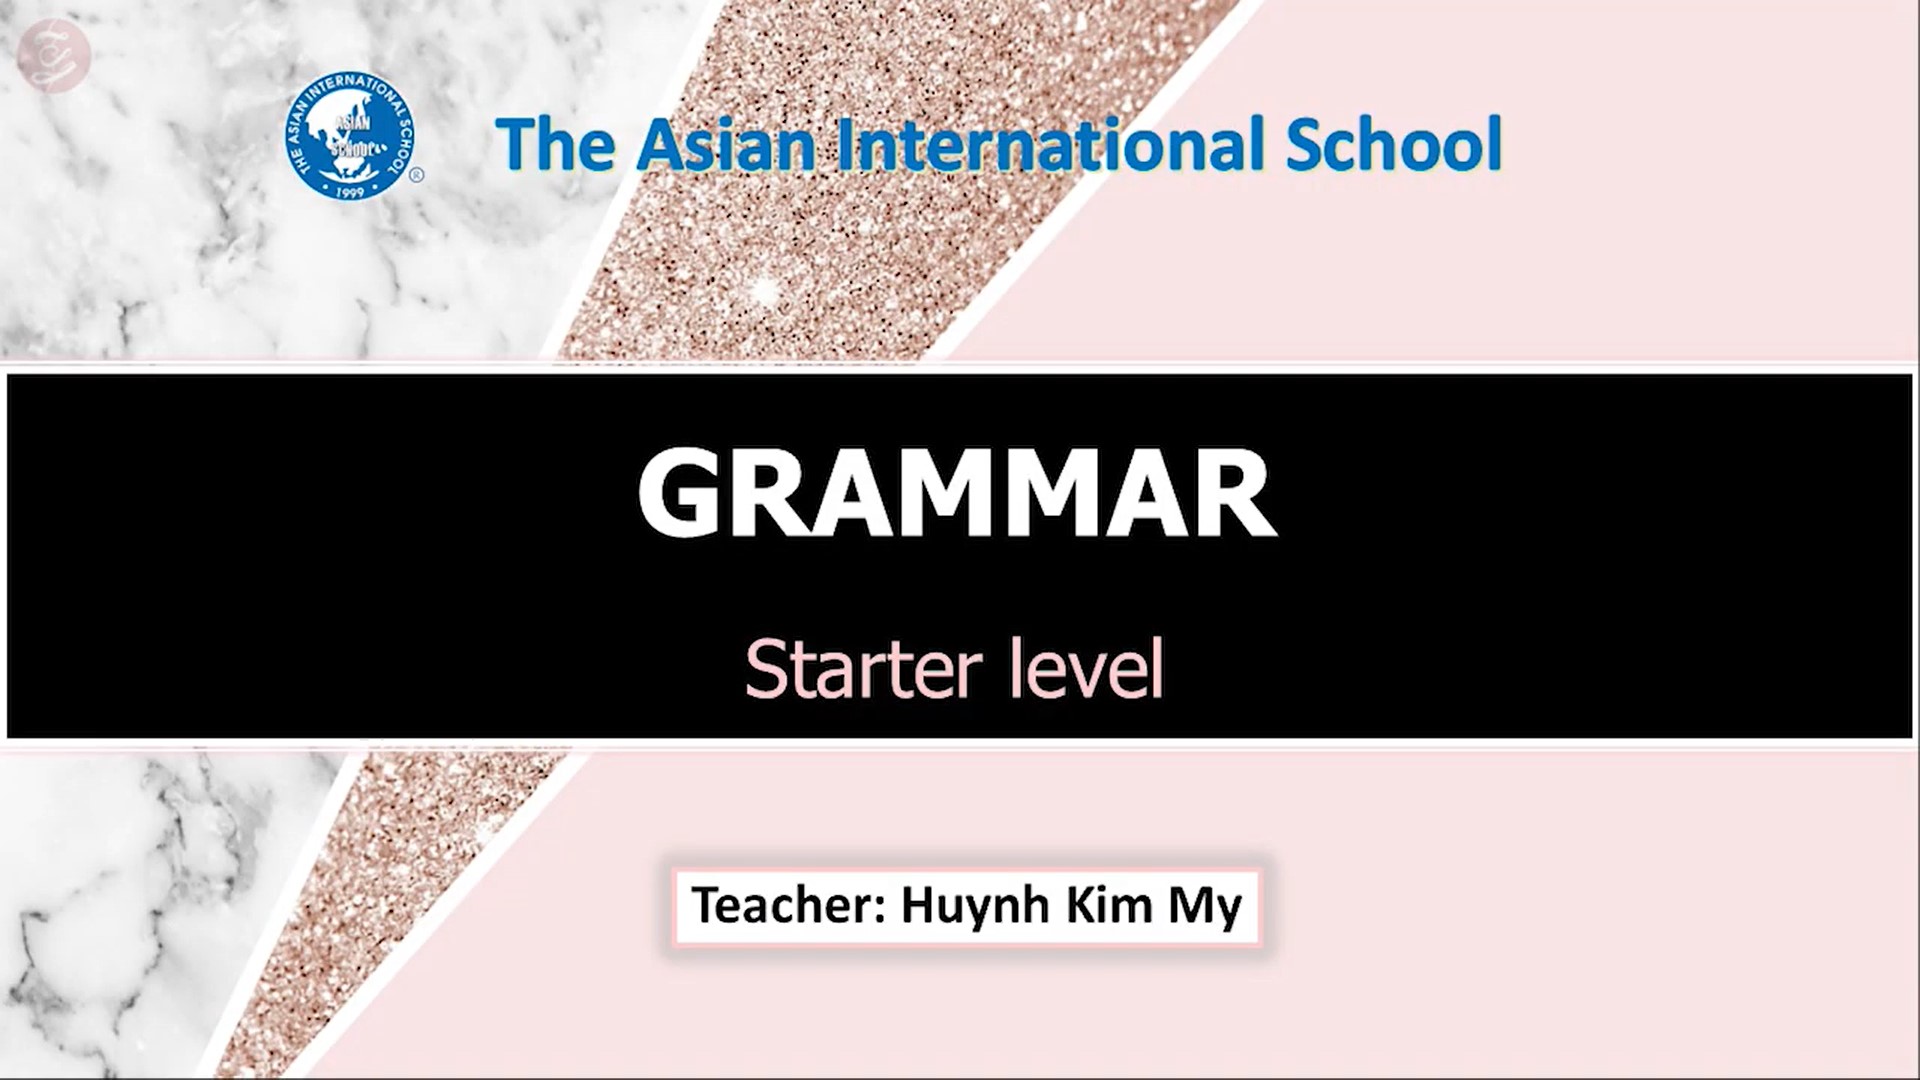 USE NOUNS IN THE SUBJECT AND PREDICATE - Teacher: Ms. Huynh Kim My | Grammar - Starter level